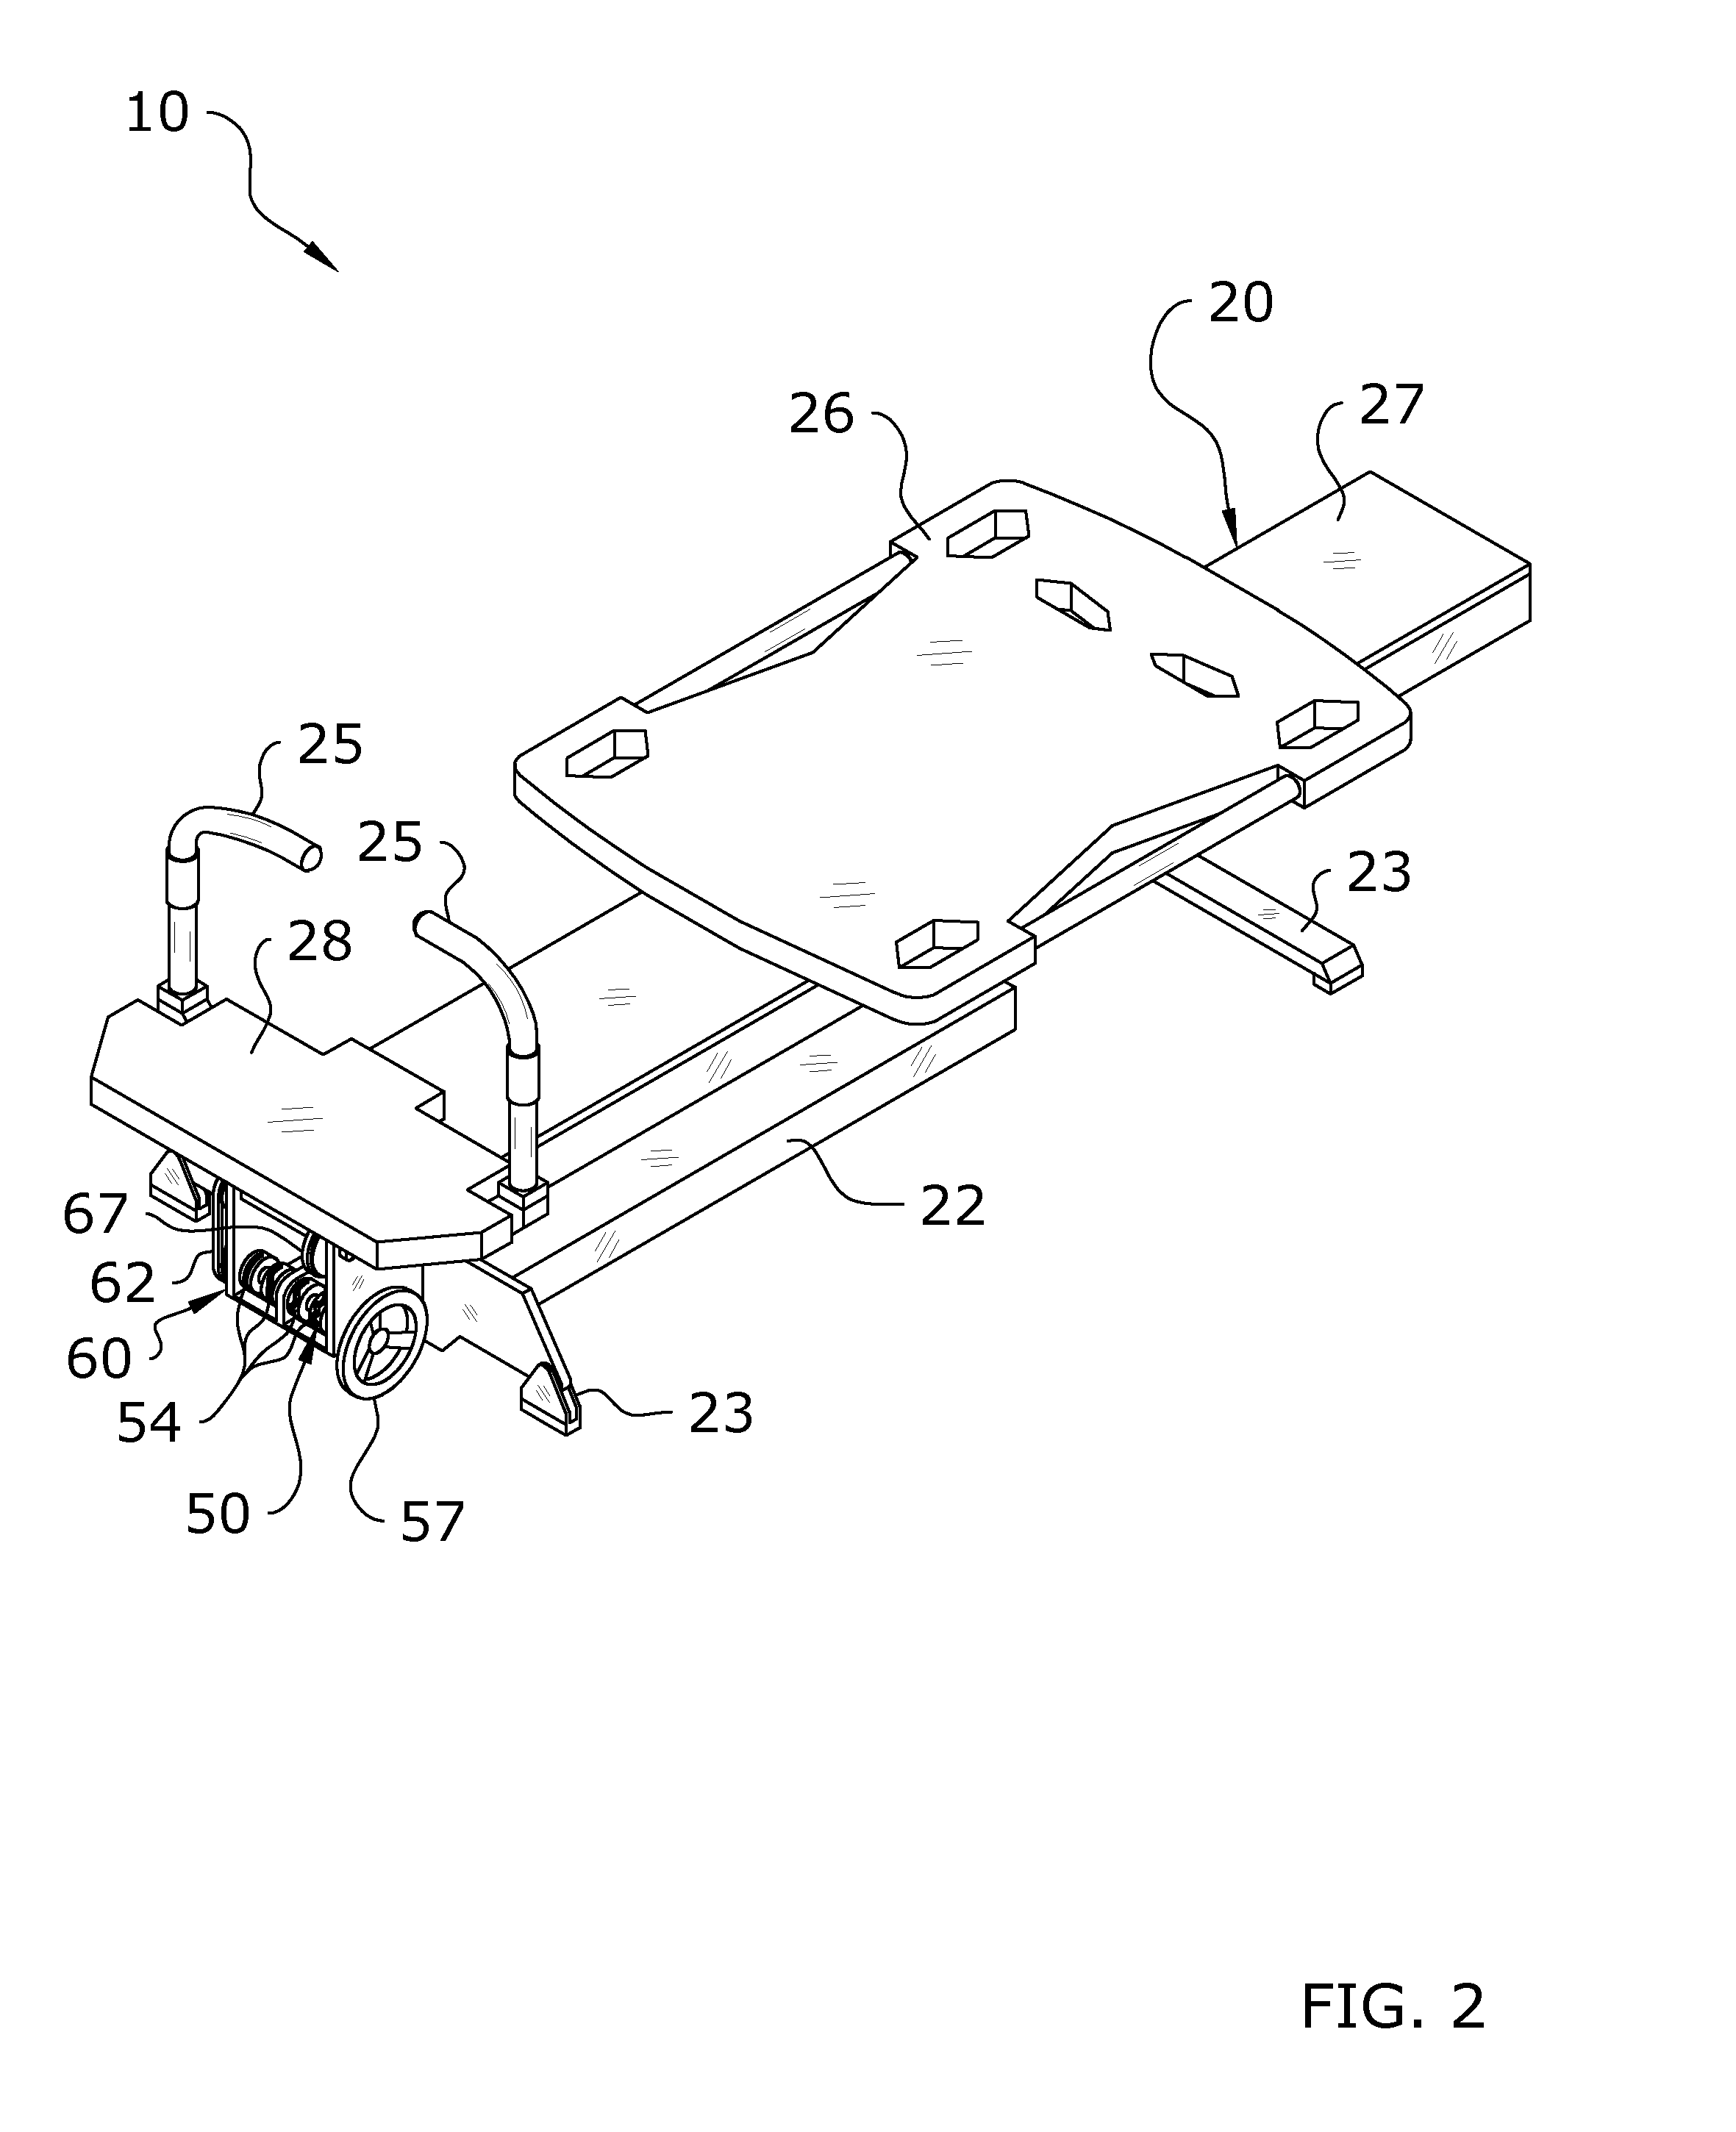 Exercise Machine With Variable Resistance System